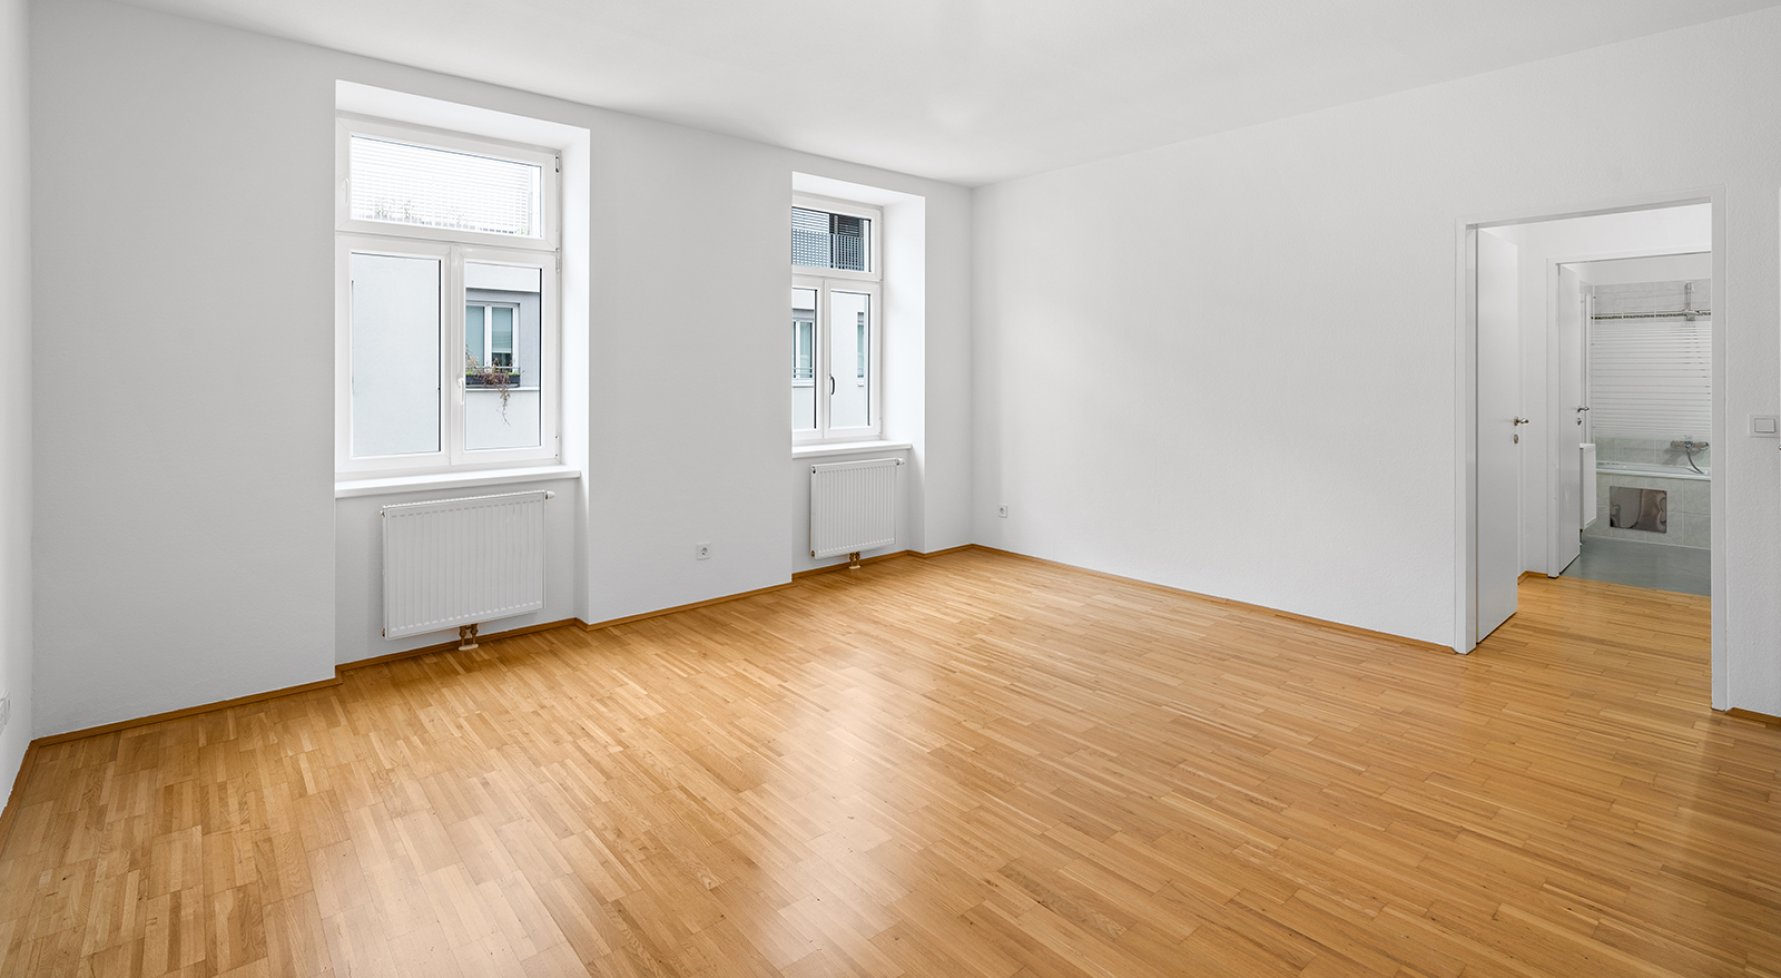 Property in 1170 Wien, 17. Bezirk: 2-room flat in renovated old building - picture 1